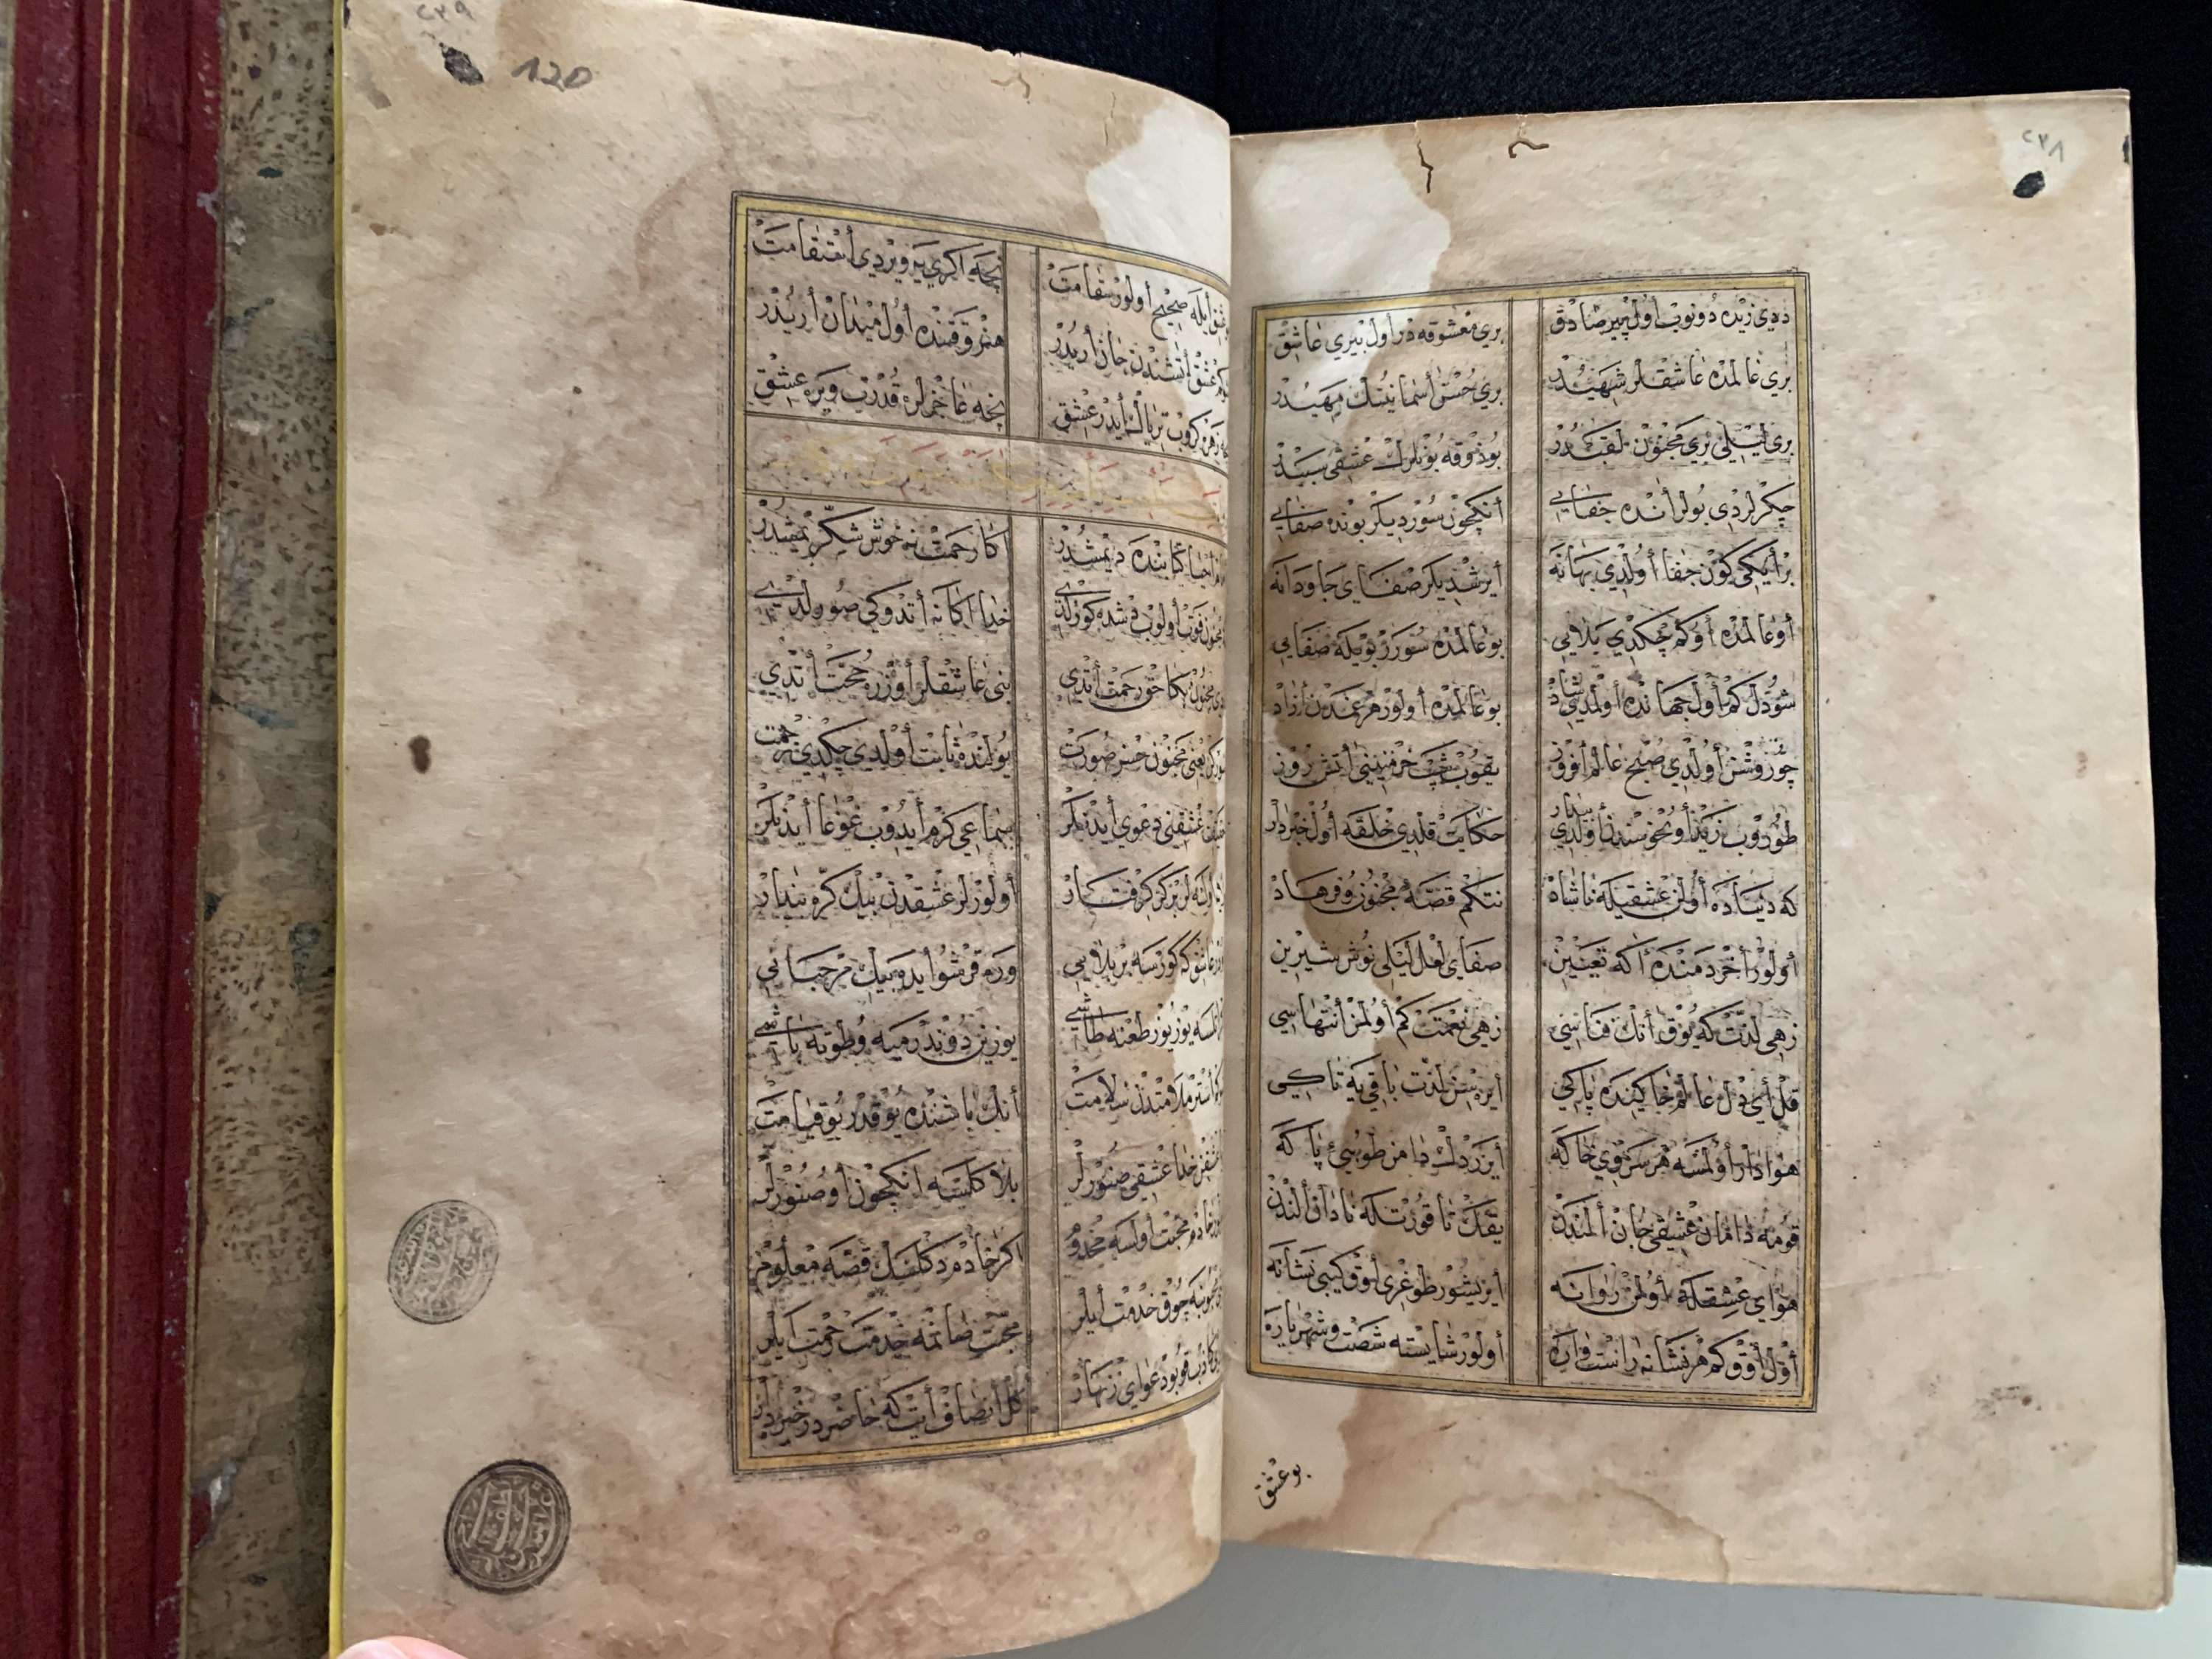 Two slightly damaged pages are seen in the copy of 'Layla and Majnun.'